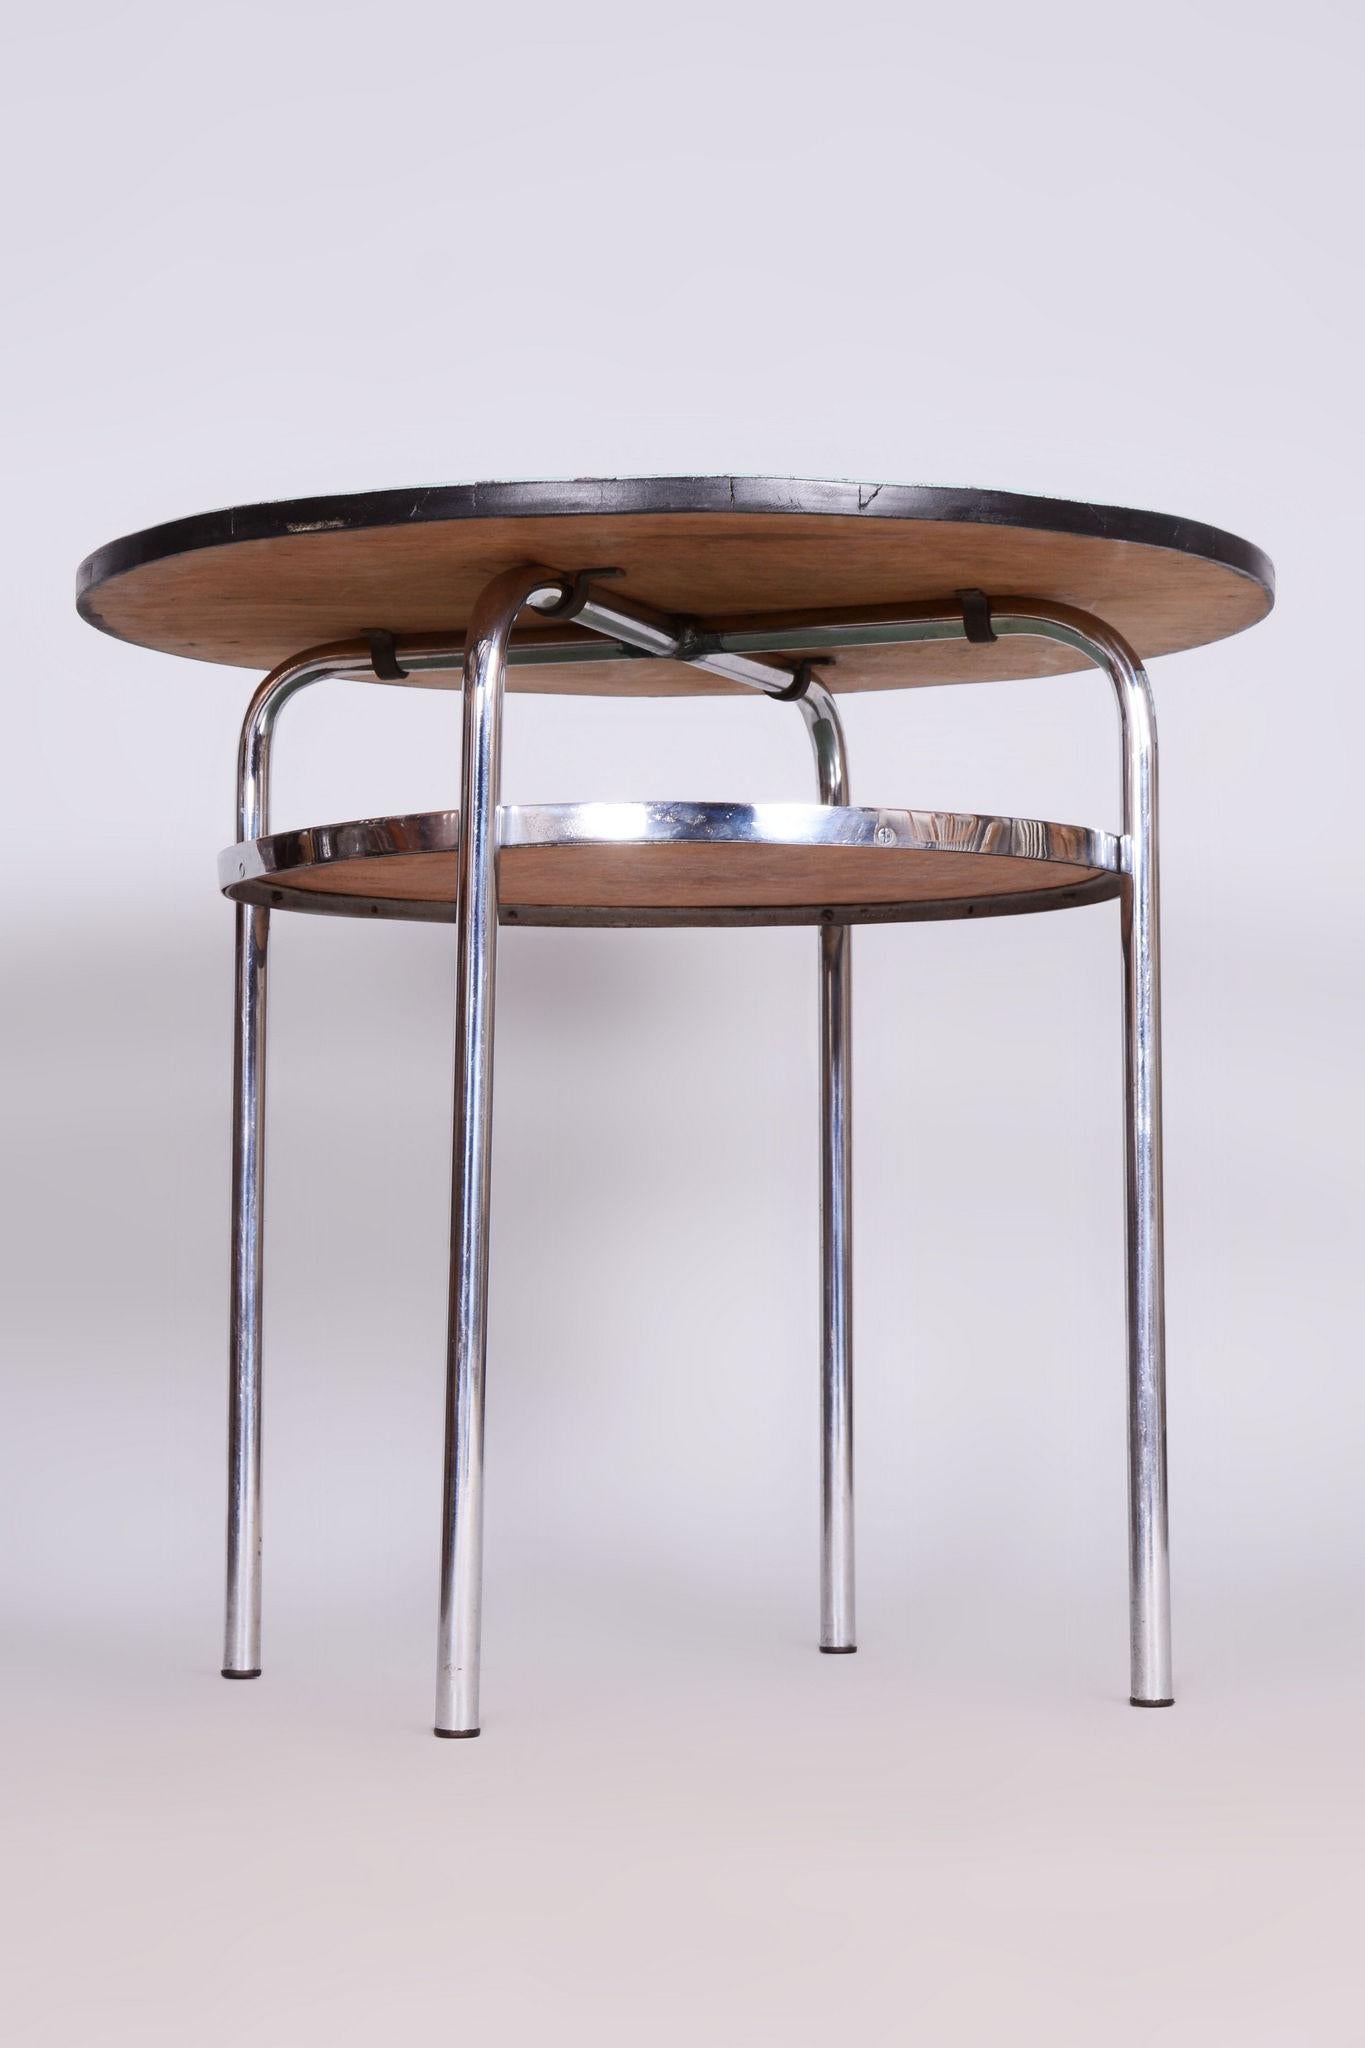 Steel Restored Bauhaus Small Round Table, Chrome, Revived Polish, Czechia, 1930s For Sale